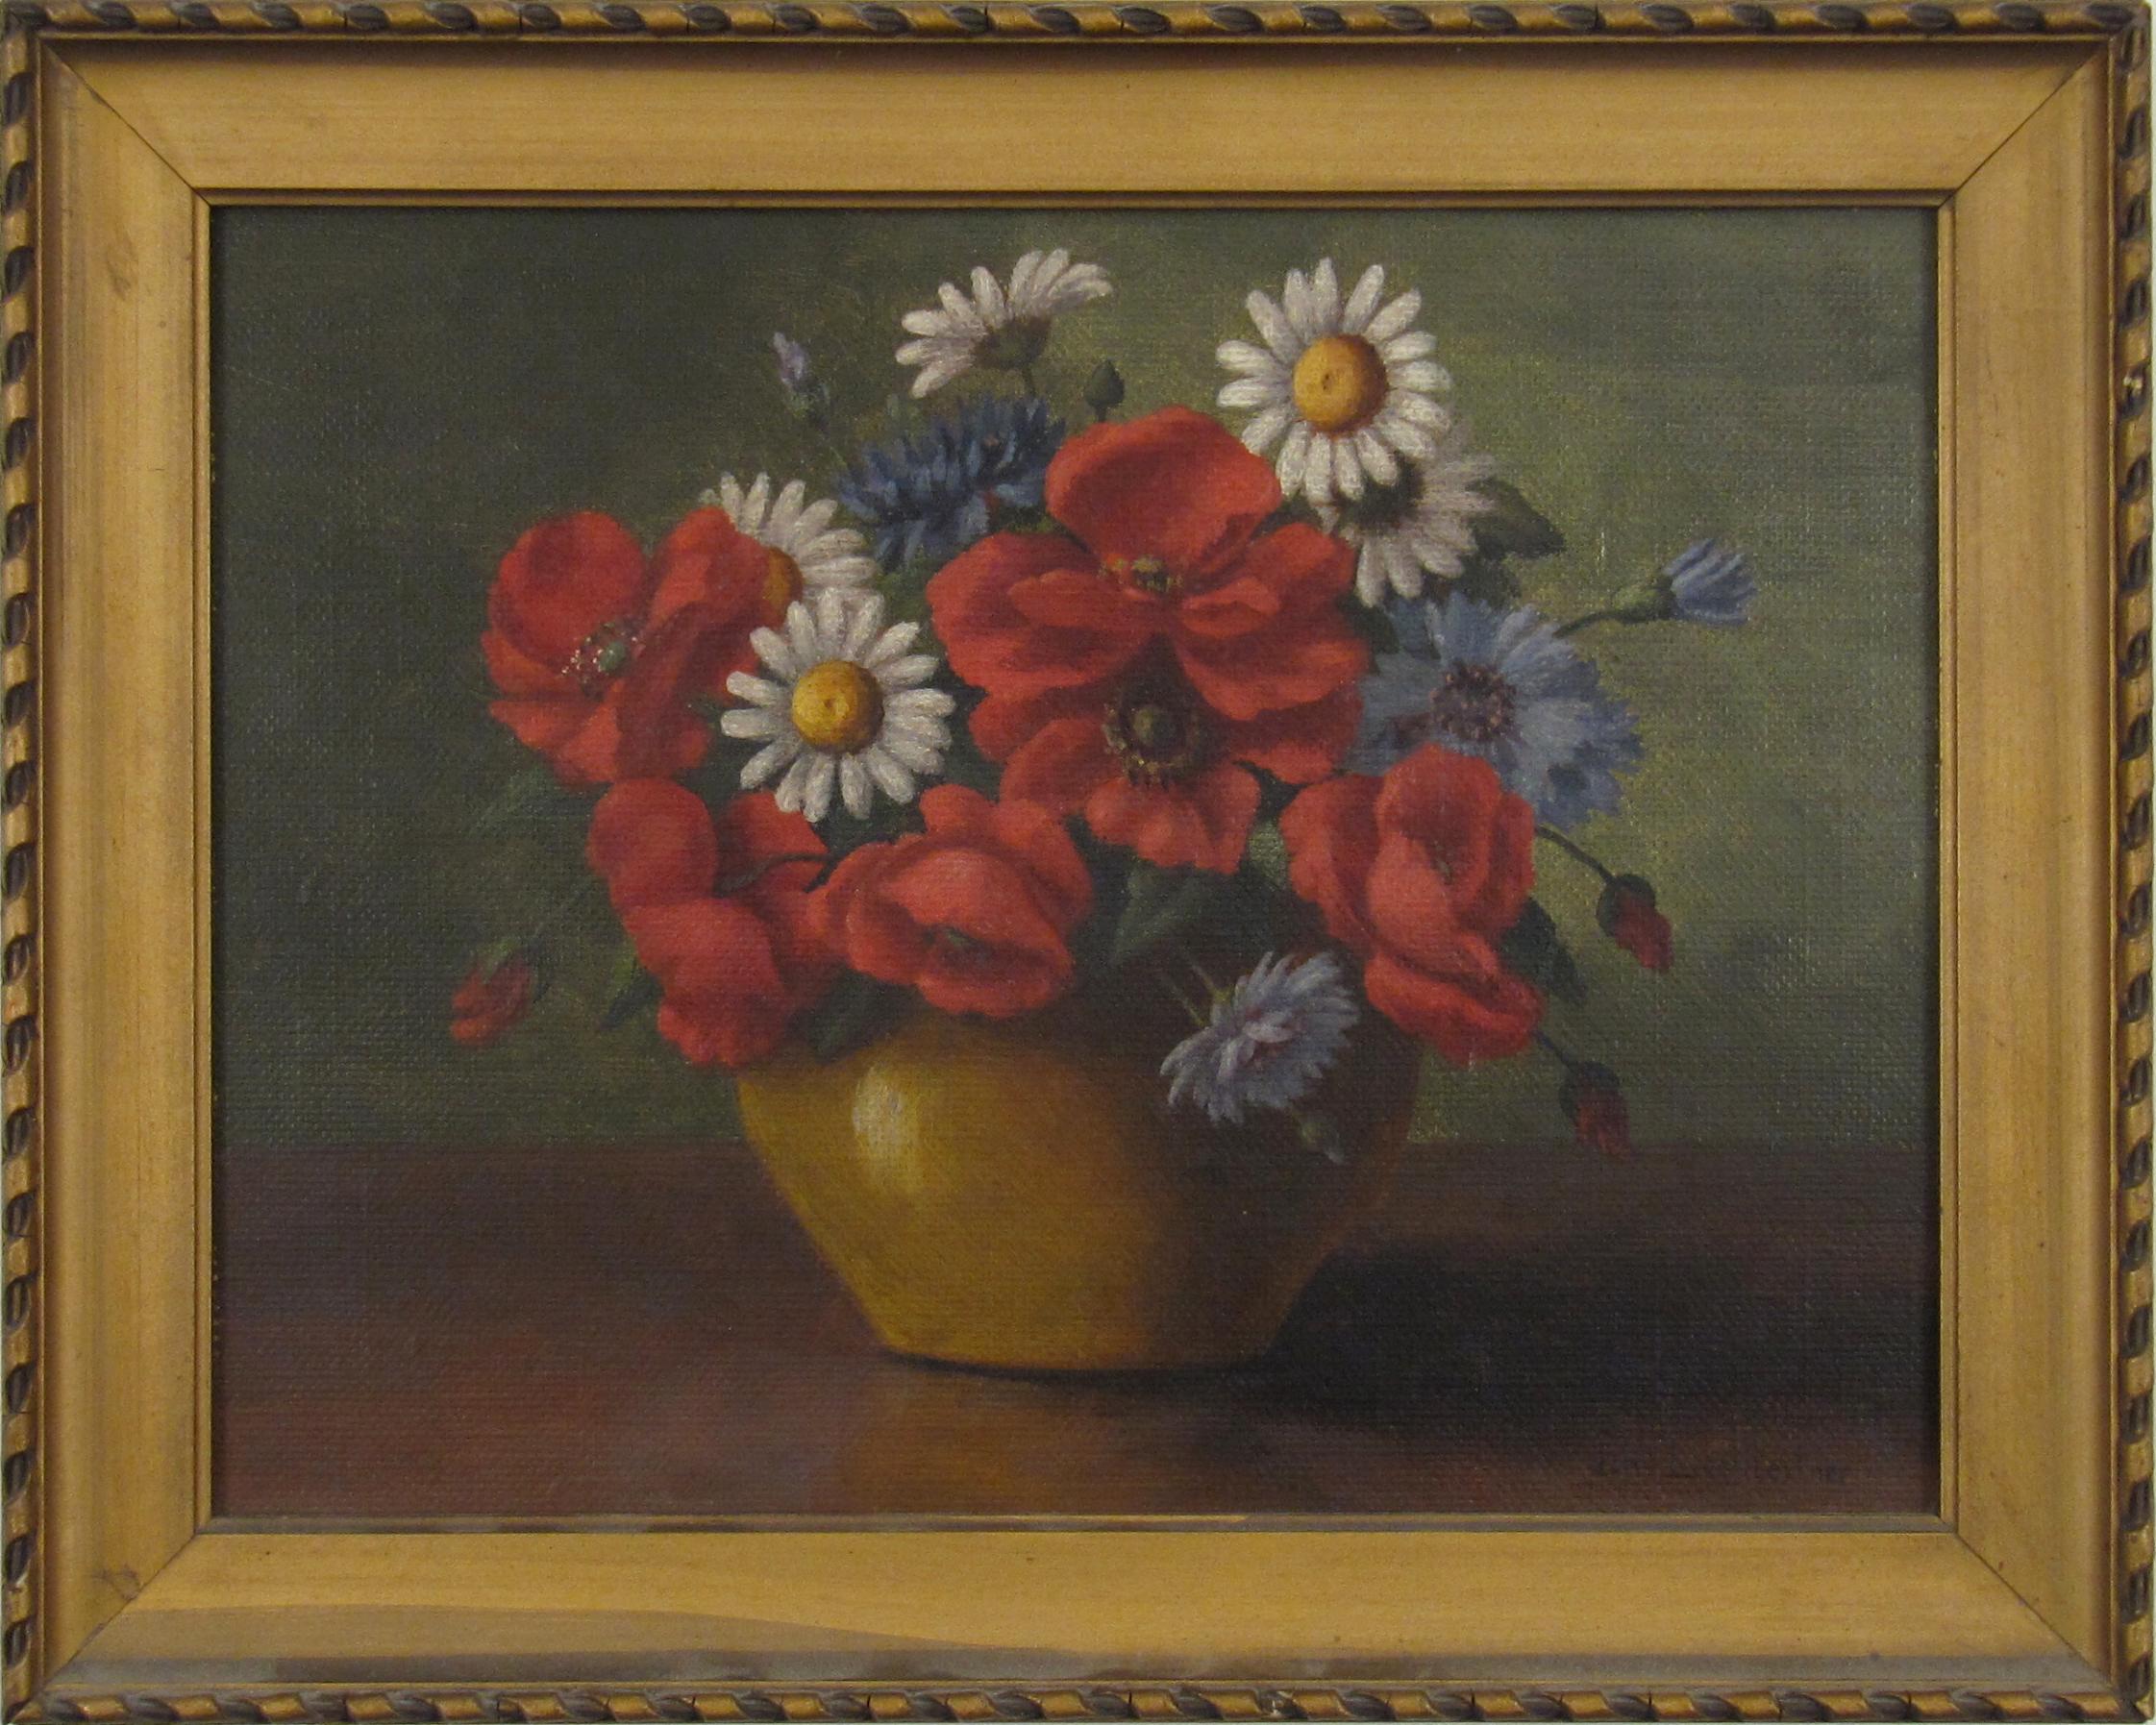 Jeanne Lechleitner
(Swiss, active in the 19th and early 20th Century)

Summer Flower Bouquet in a Mustard Coloured Vase

•	Oil on artist canvasboard ca. 21 x 26.5 cm
•	Later Frame 25 x 31 cm
•	Ca. 1910
•	Signed lower right

Jeanne Lechleitner, born